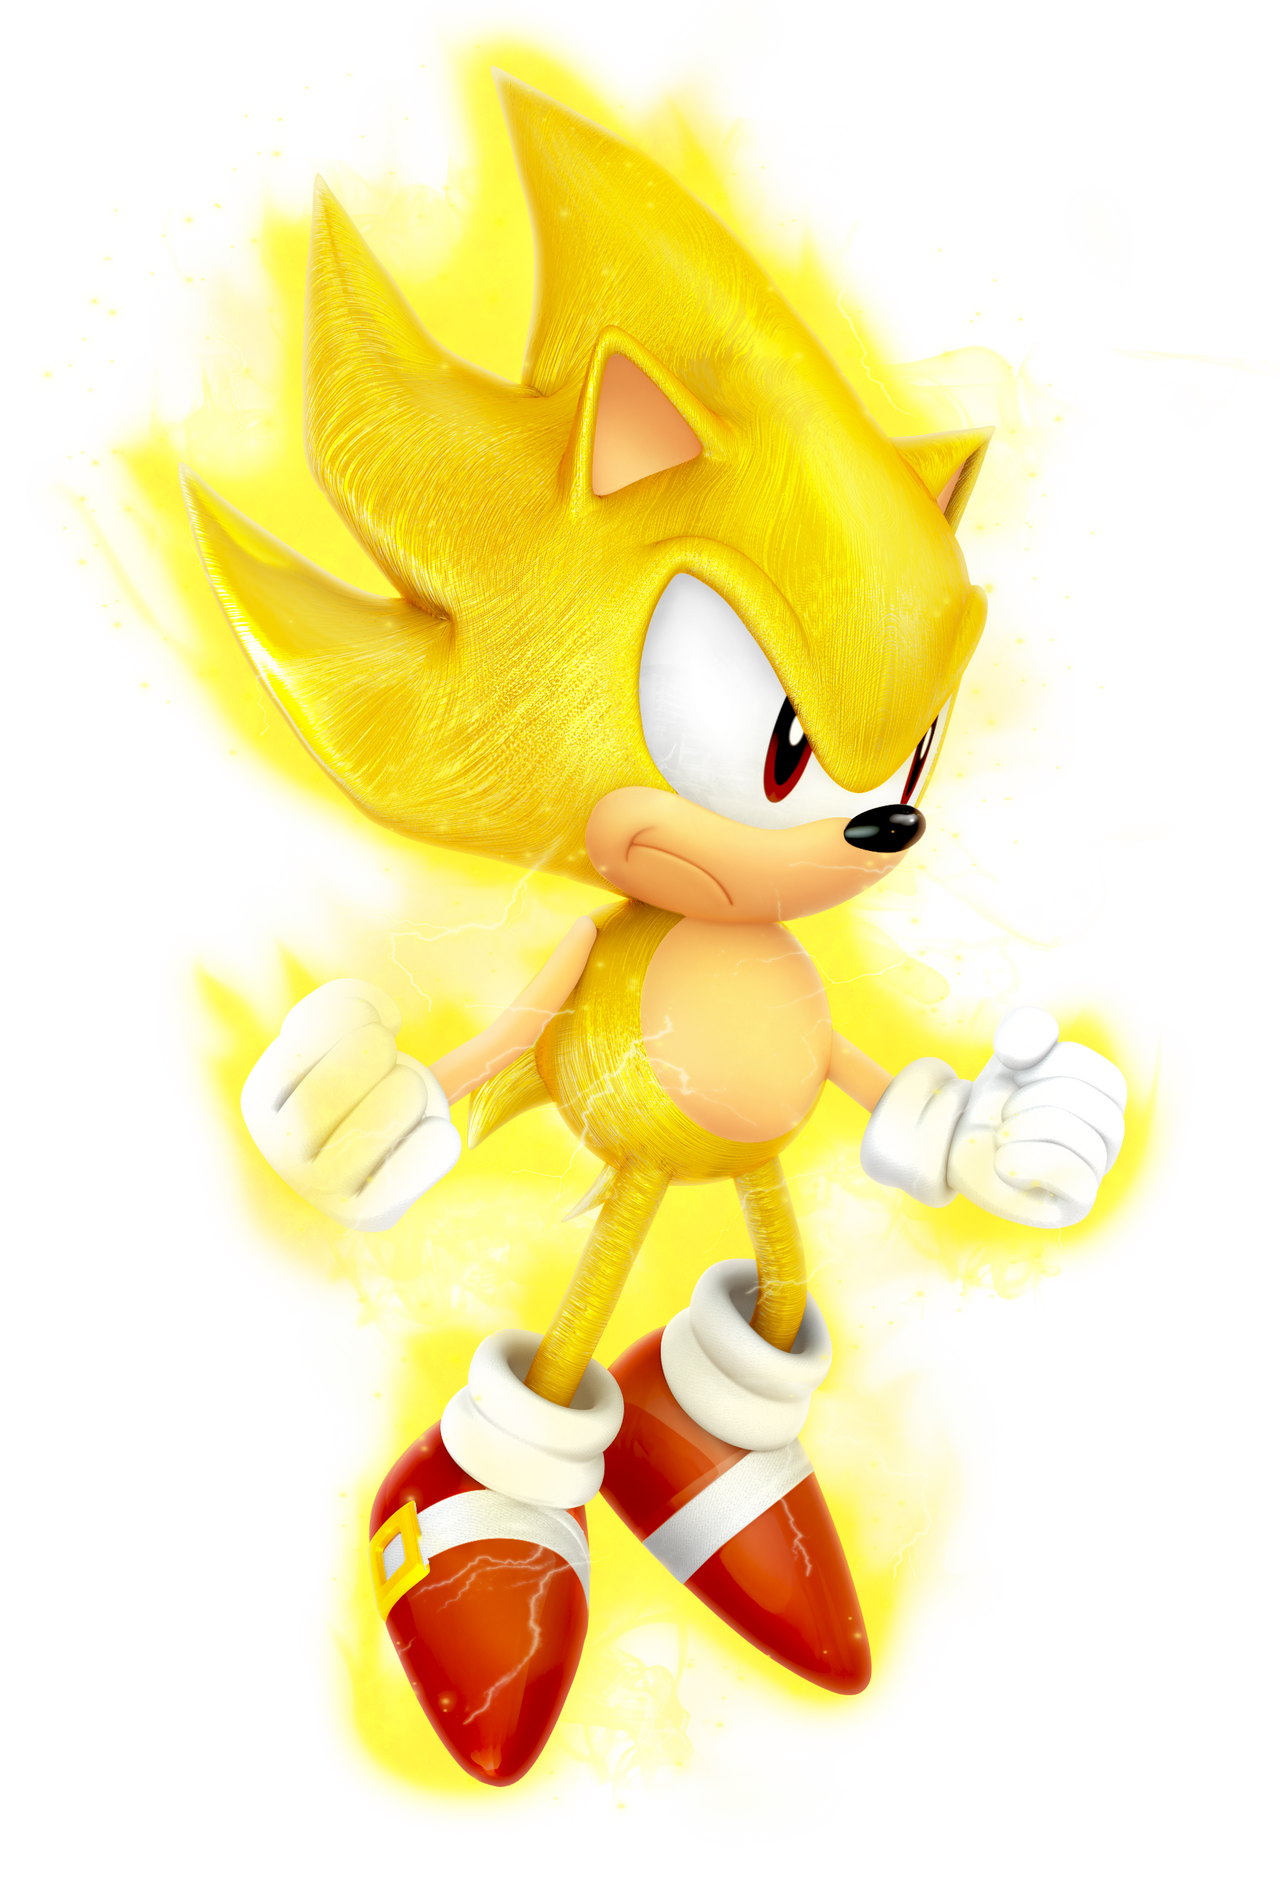 Classic Sonic Render by ModernLixes on DeviantArt